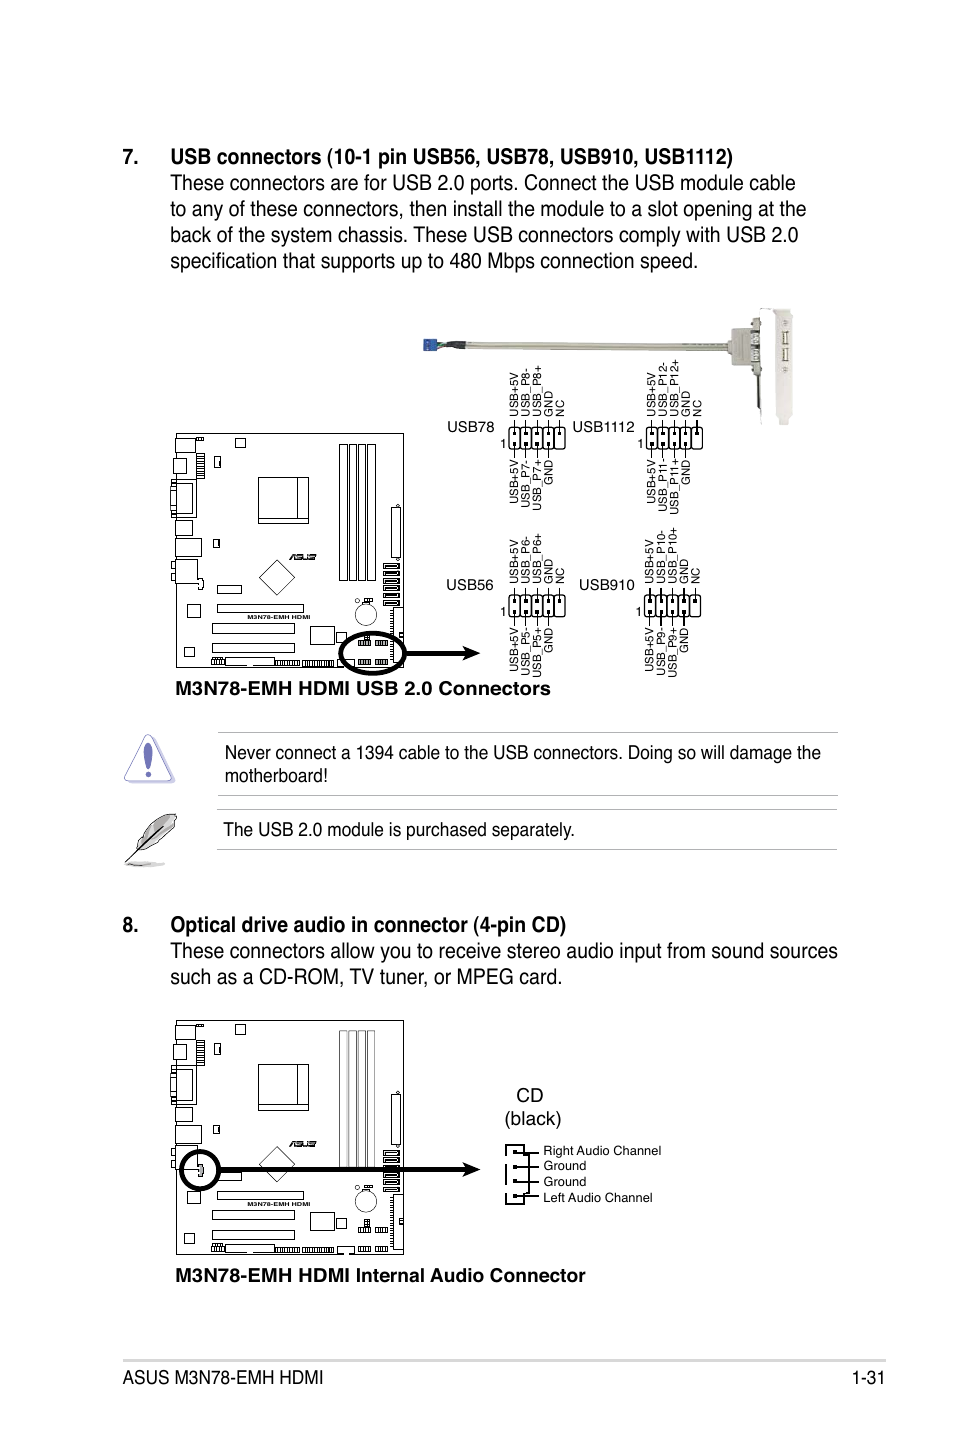 The usb 2.0 module is purchased separately, M3n78-emh hdmi internal audio  connector cd (black) | Asus M3N78-EMH HDMI User Manual | Page 43 / 102